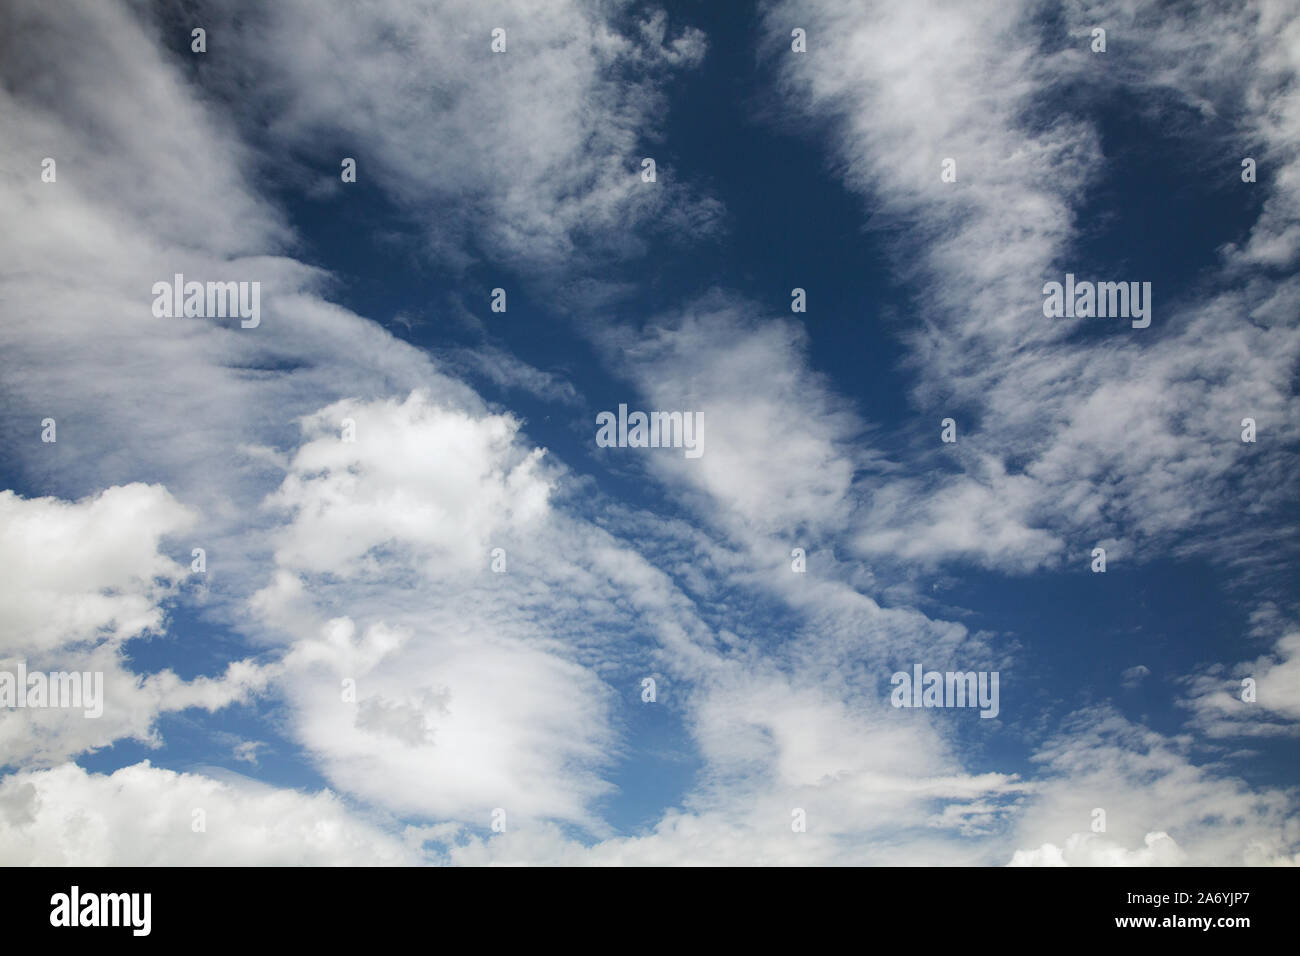 blue sky background with white clouds Stock Photo